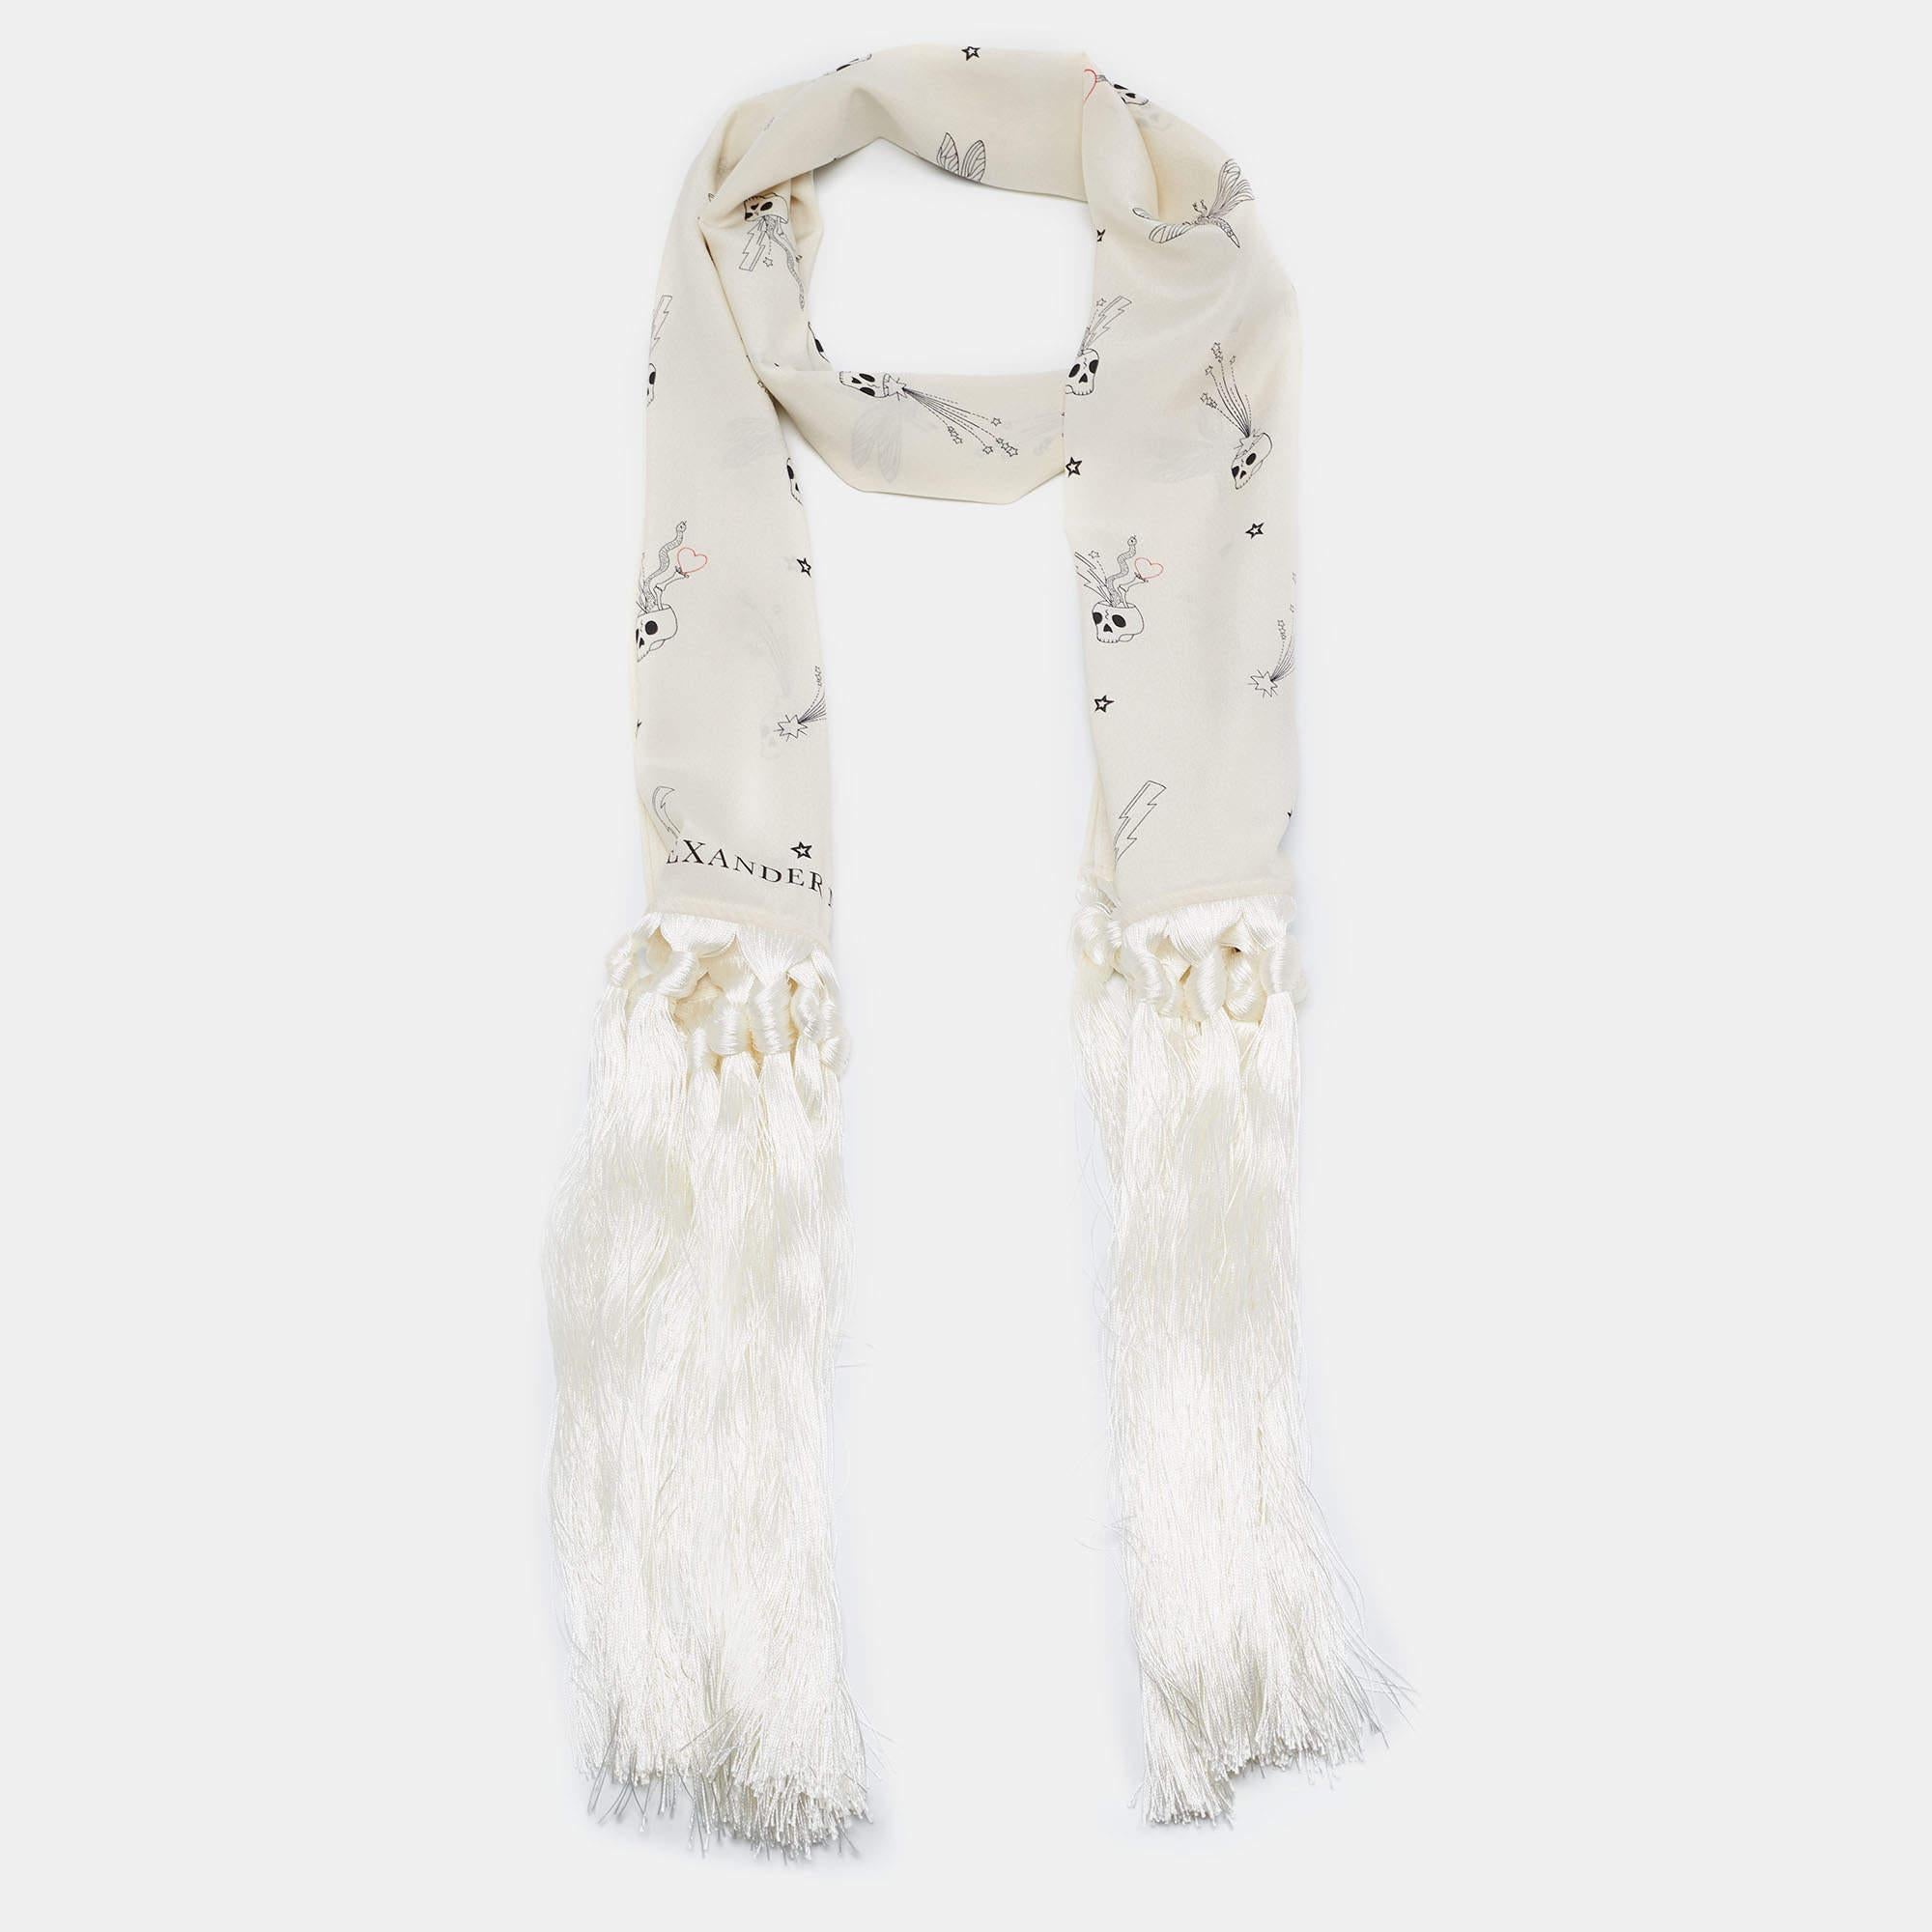 The Alexander McQueen stole is a luxurious fashion accessory. Made from exquisite silk, it features a captivating skull print in shades of off-white, exuding a sense of edgy elegance. The stole is adorned with delicate fringes, adding a touch of